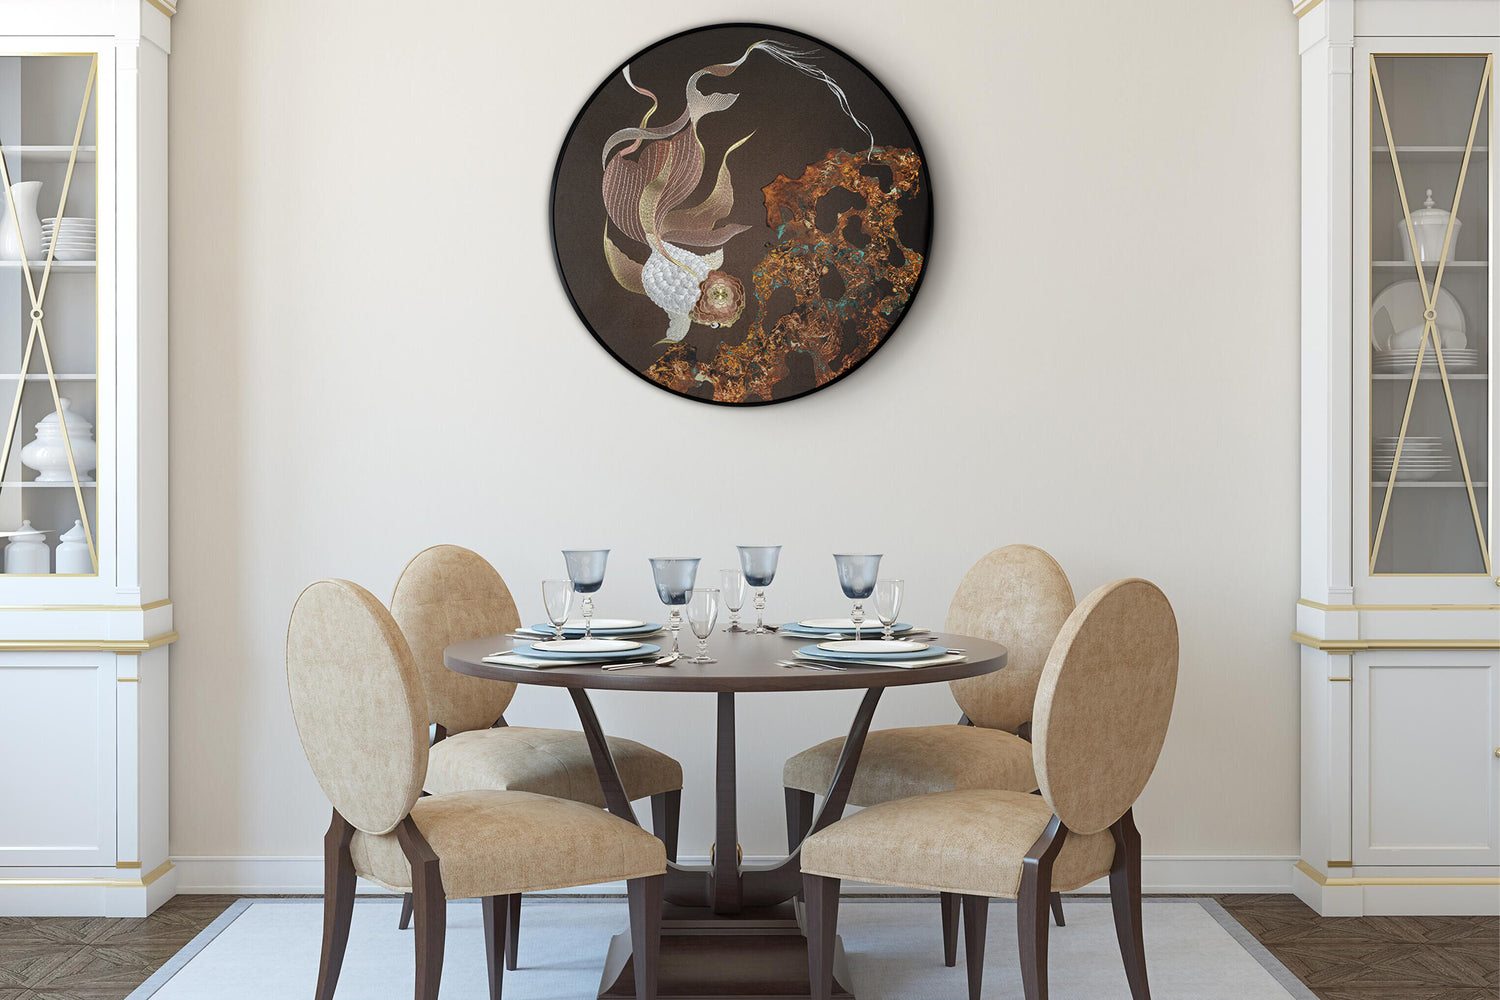 An embroidered work of art embroidered with carp hangs on the wall of the dinning room, which is paired with an elegant dining table and chairs, making the interior very simple and Nordic.